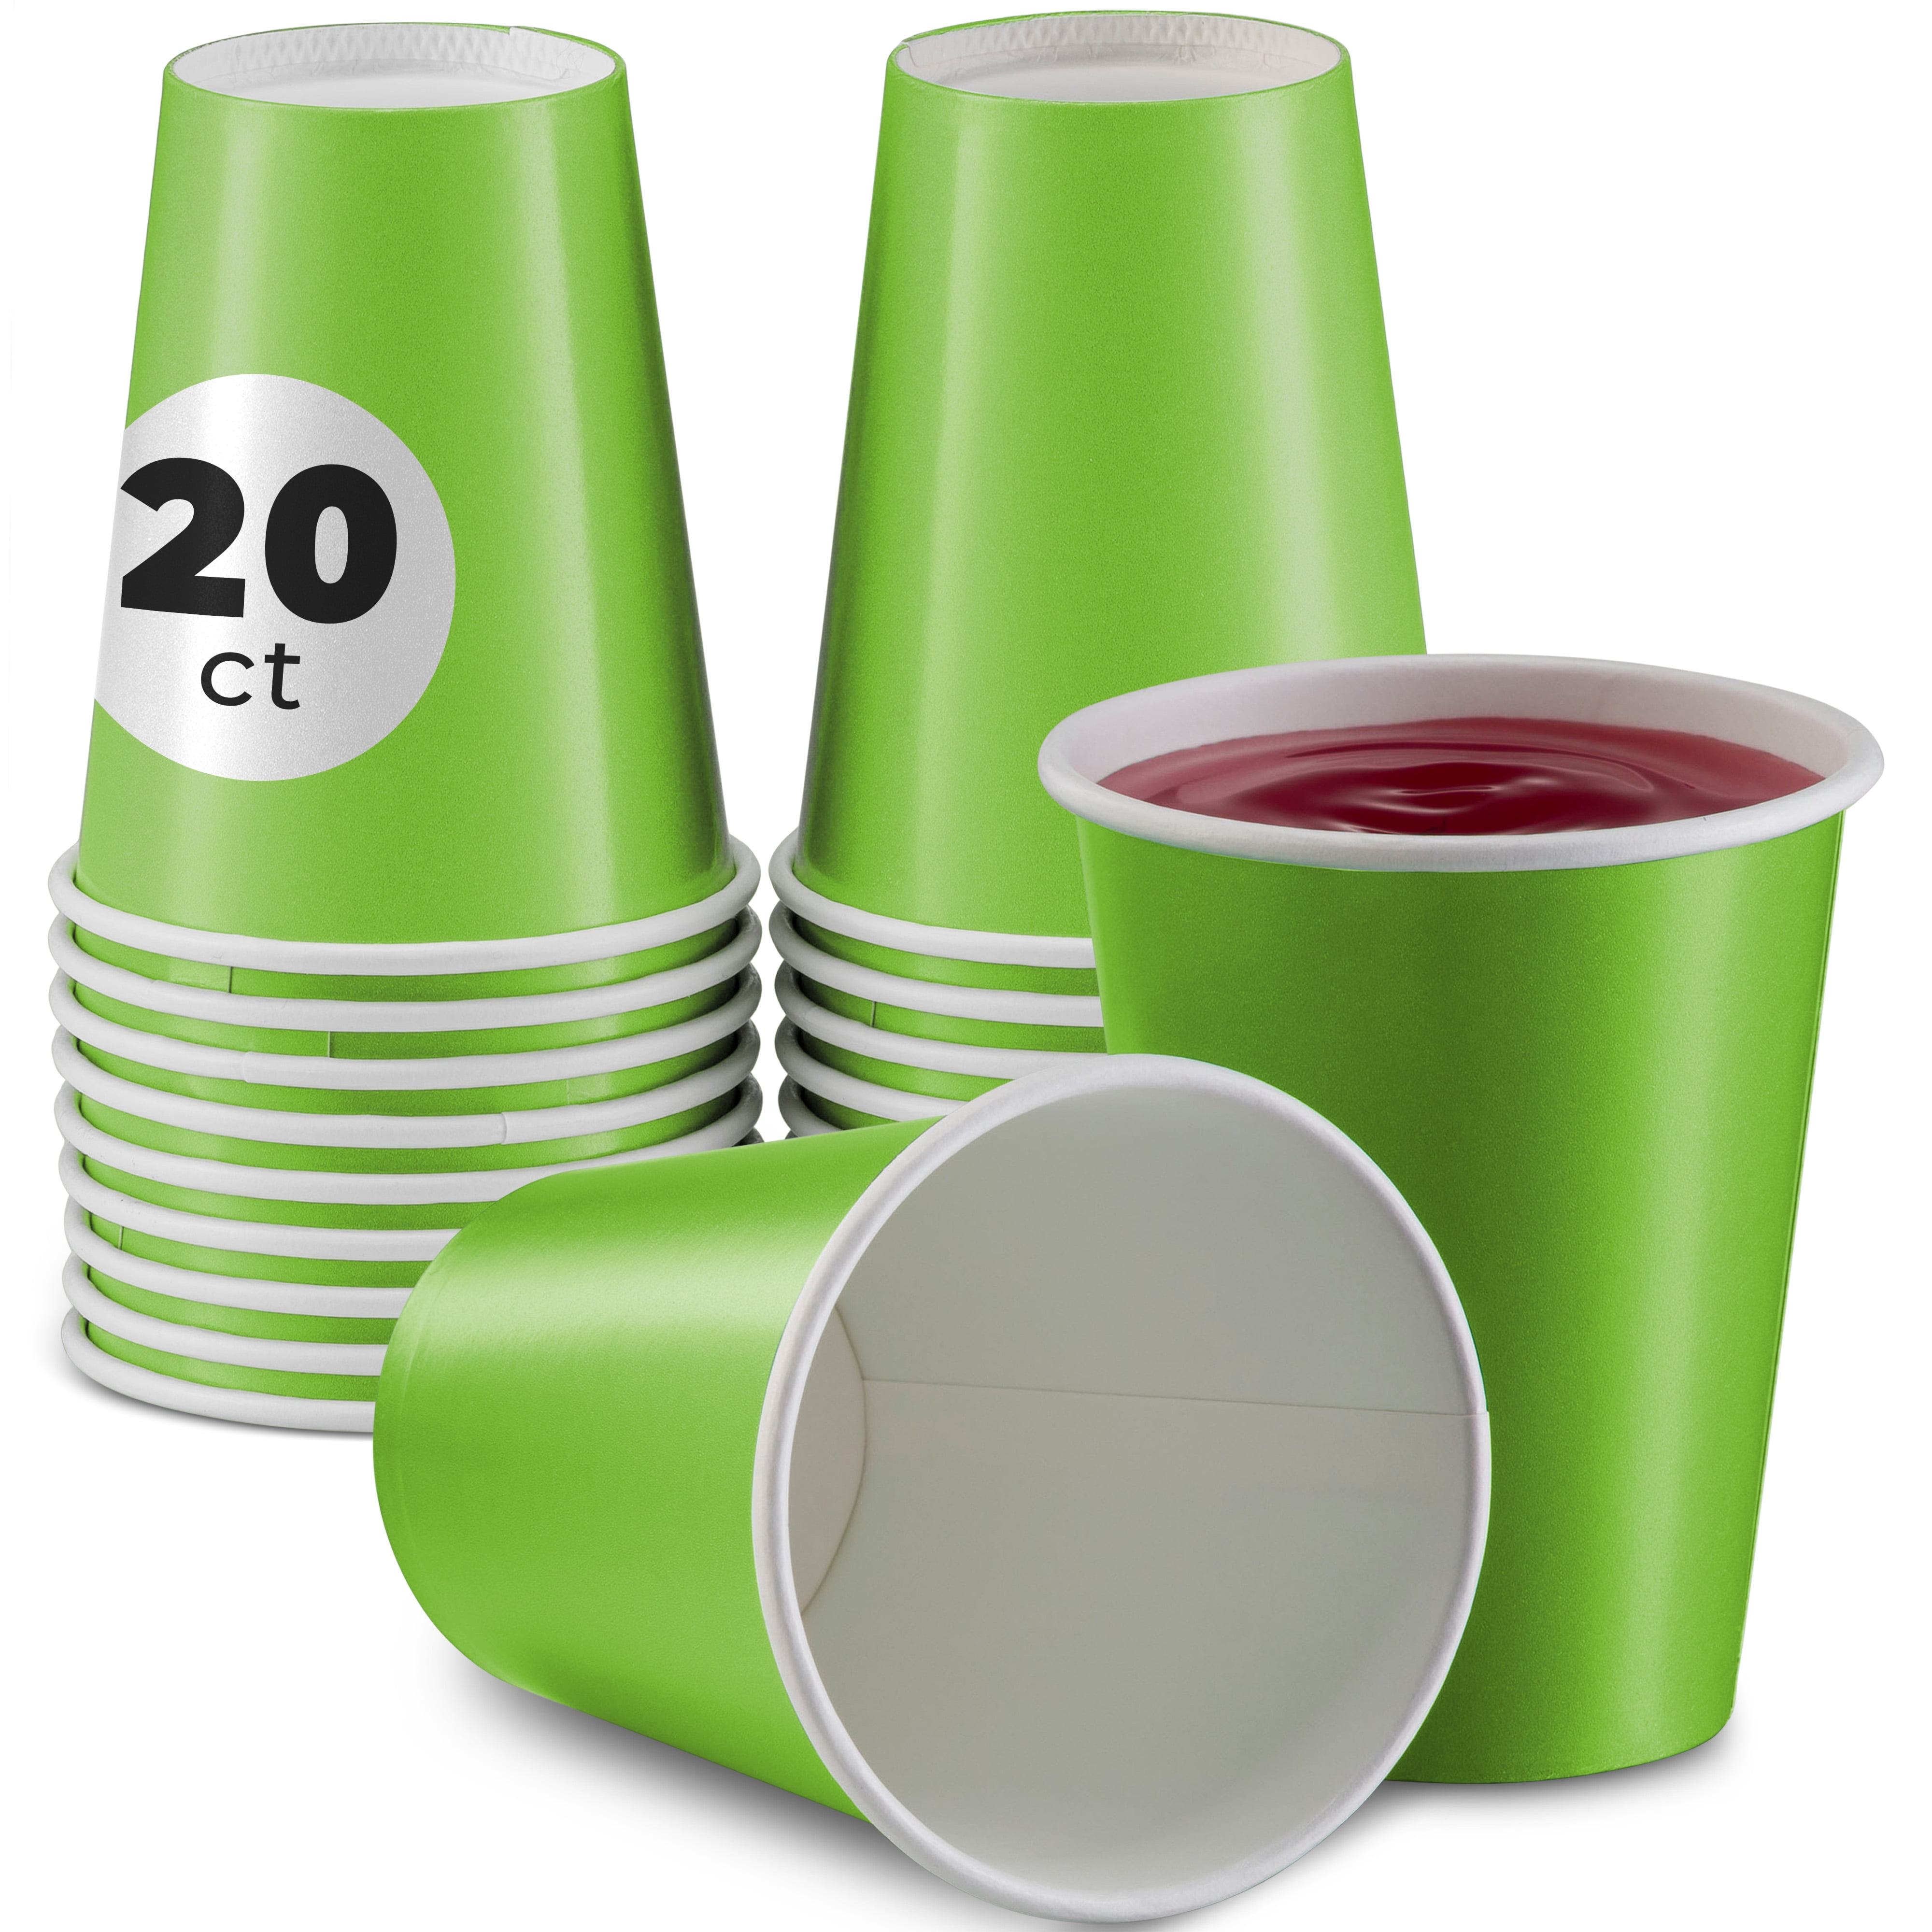 9-oz. Green Paper Party Cups, 12 ct.